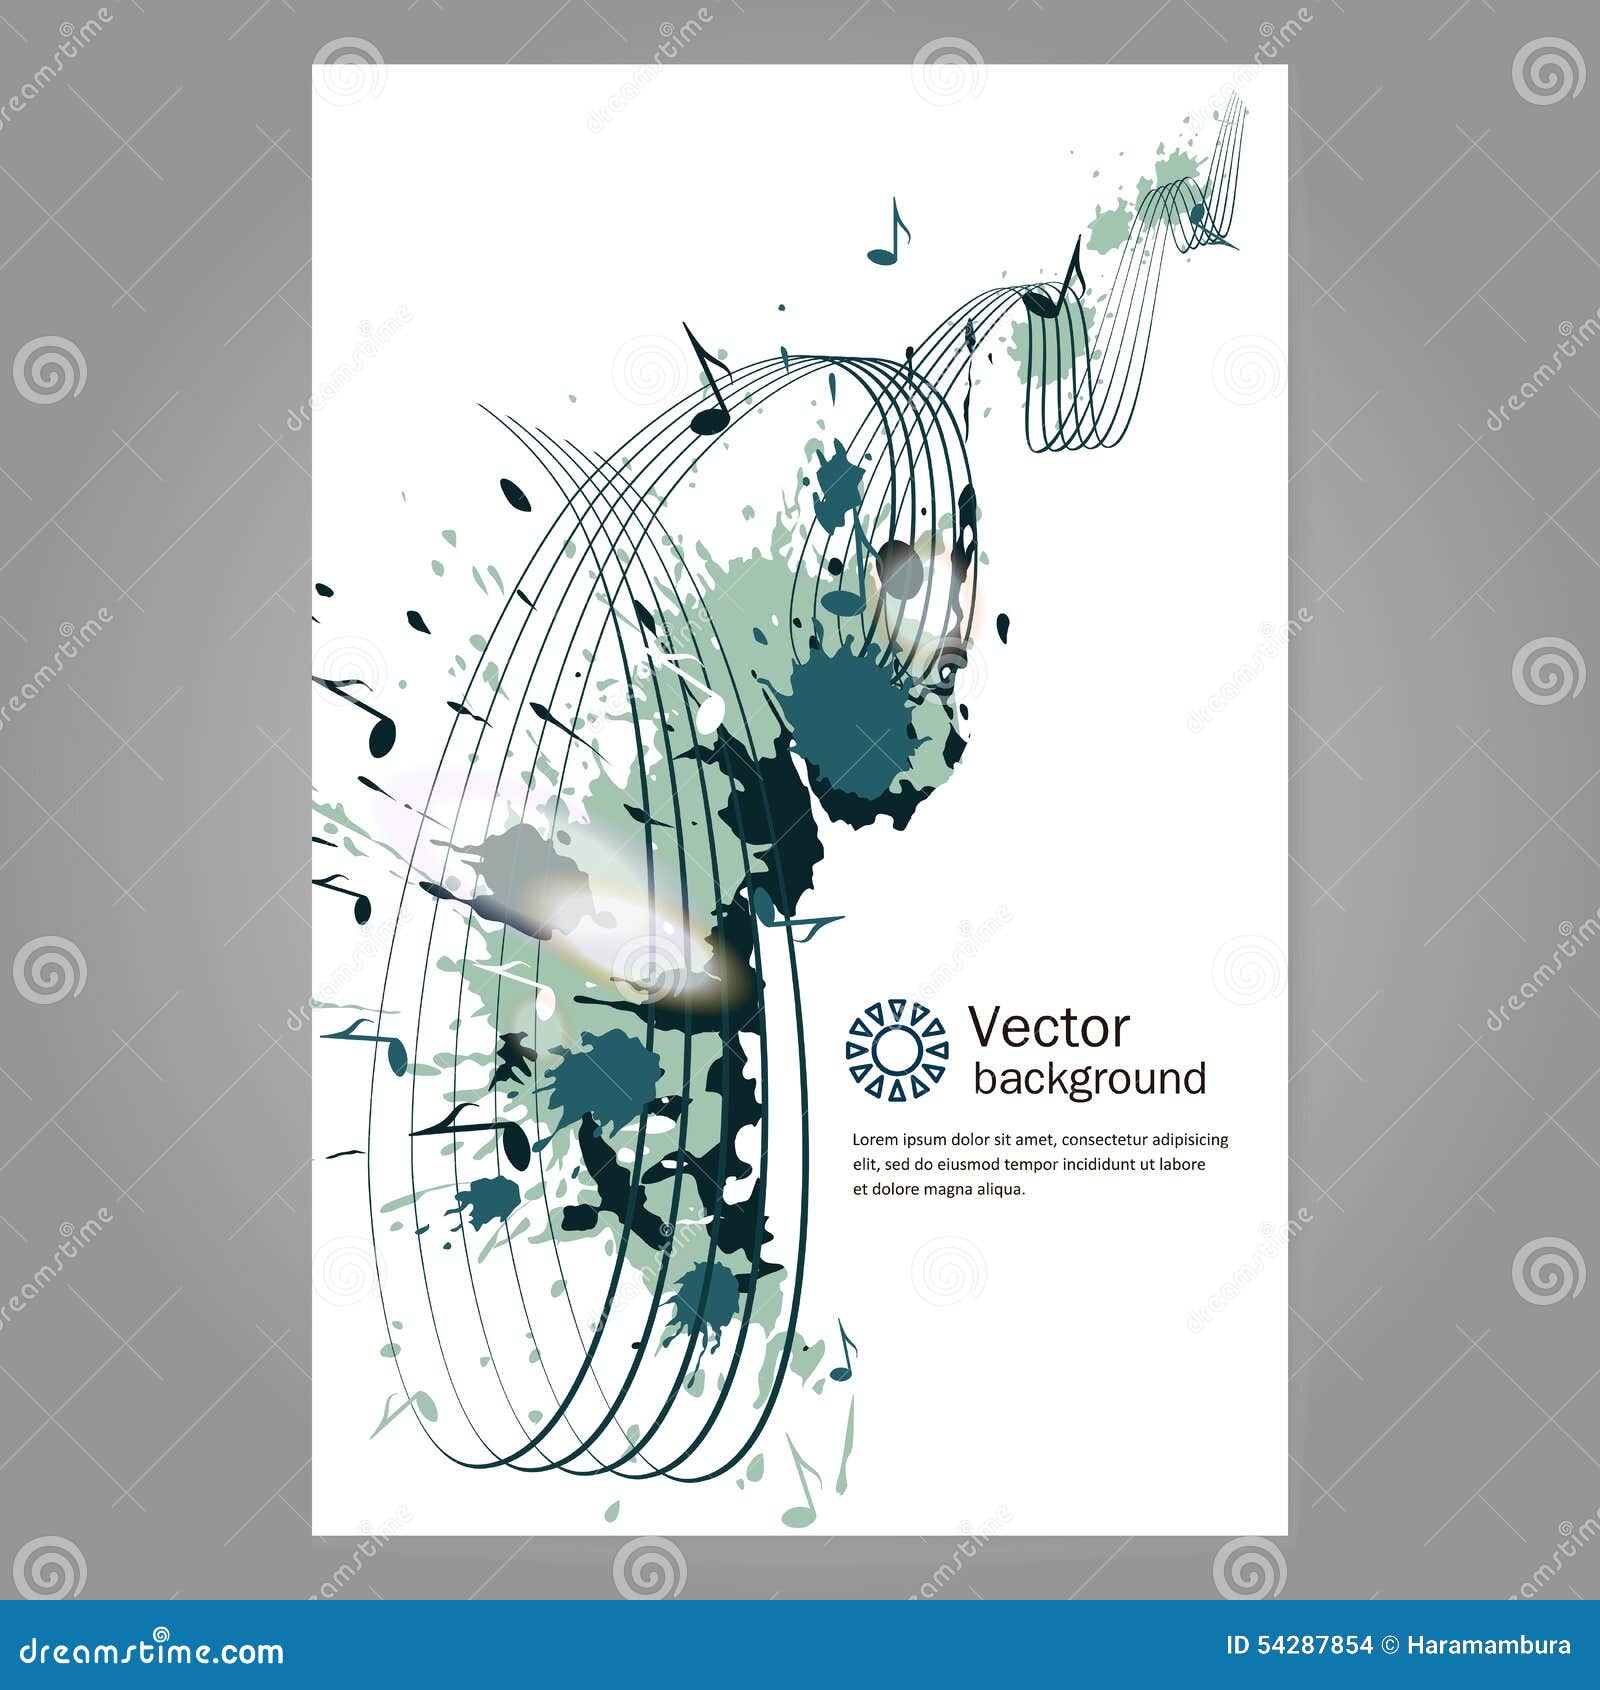 Corporate style - music. Poster. Vector.